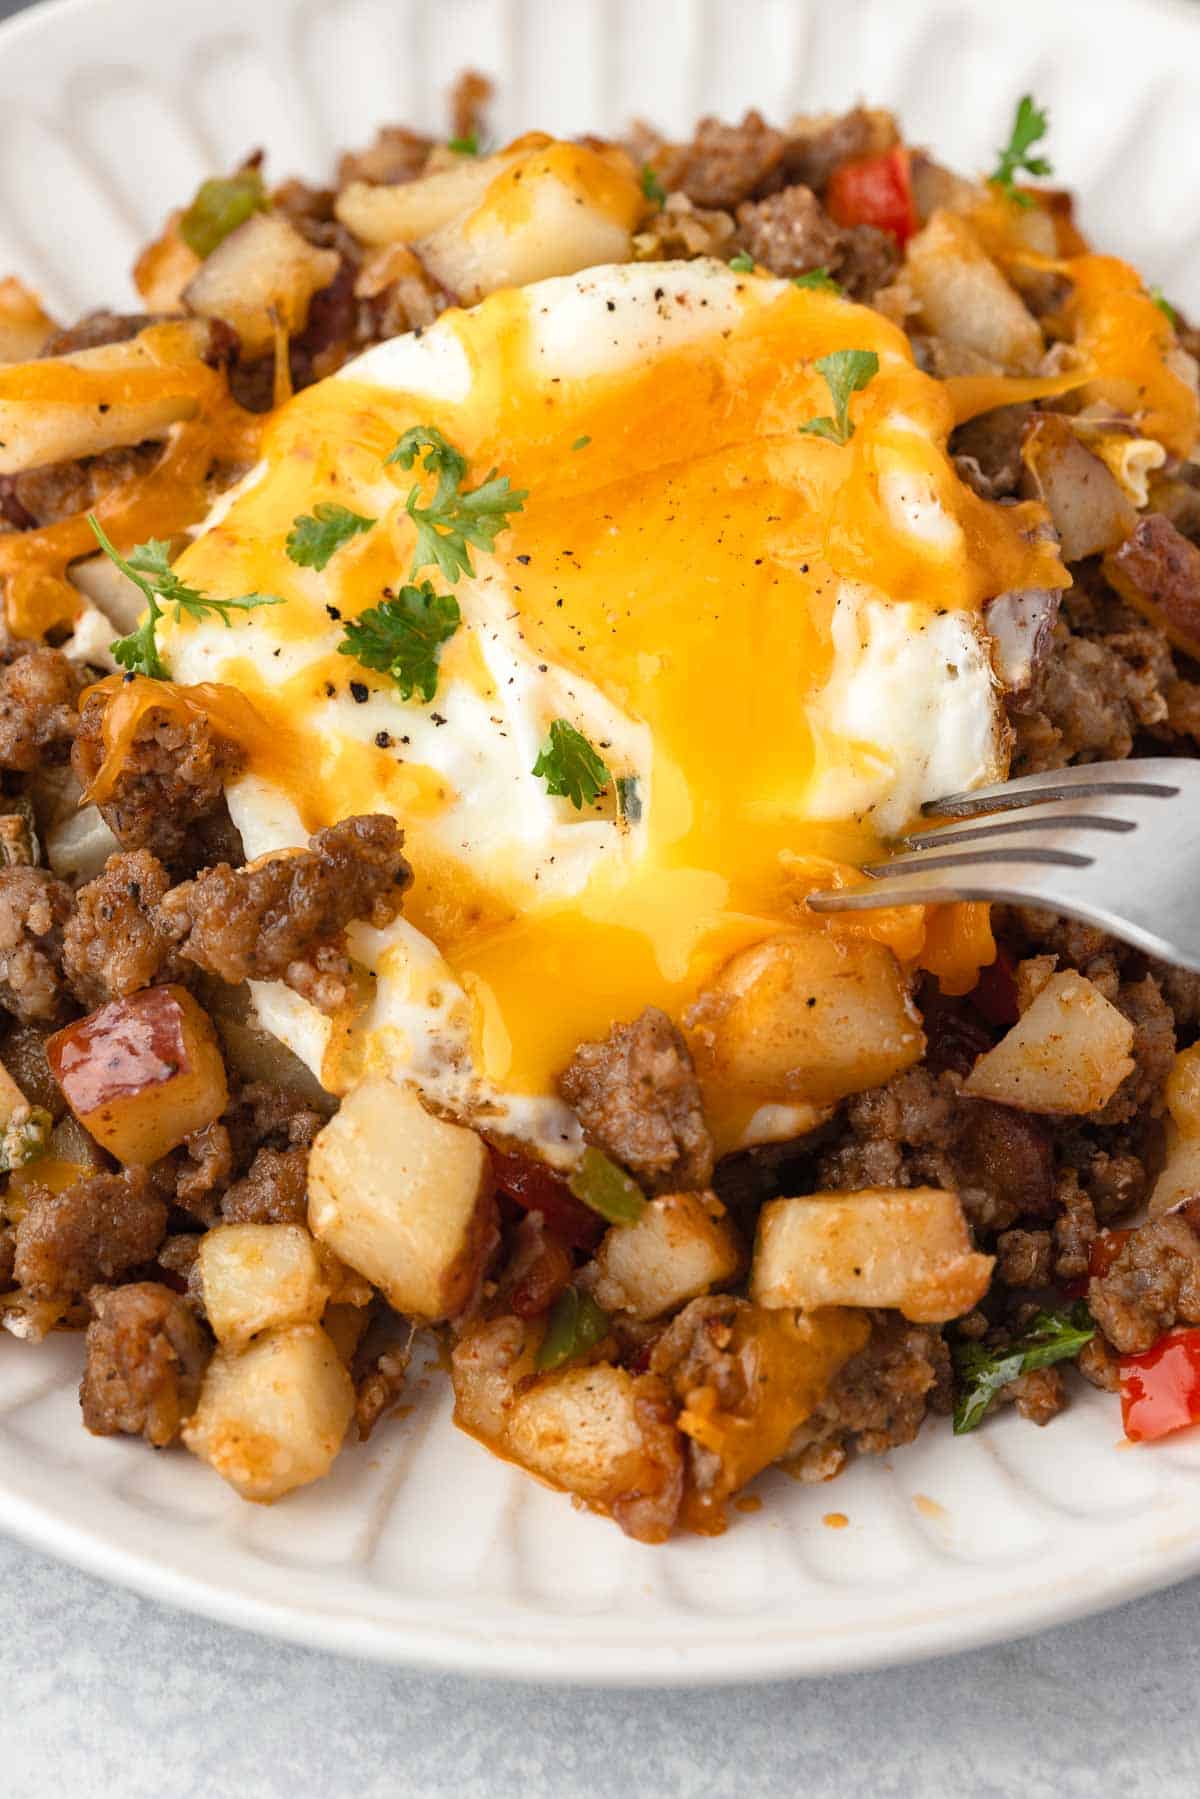 The breakfast sausage potato skillet is made with eggs cooked with a runny yolk.